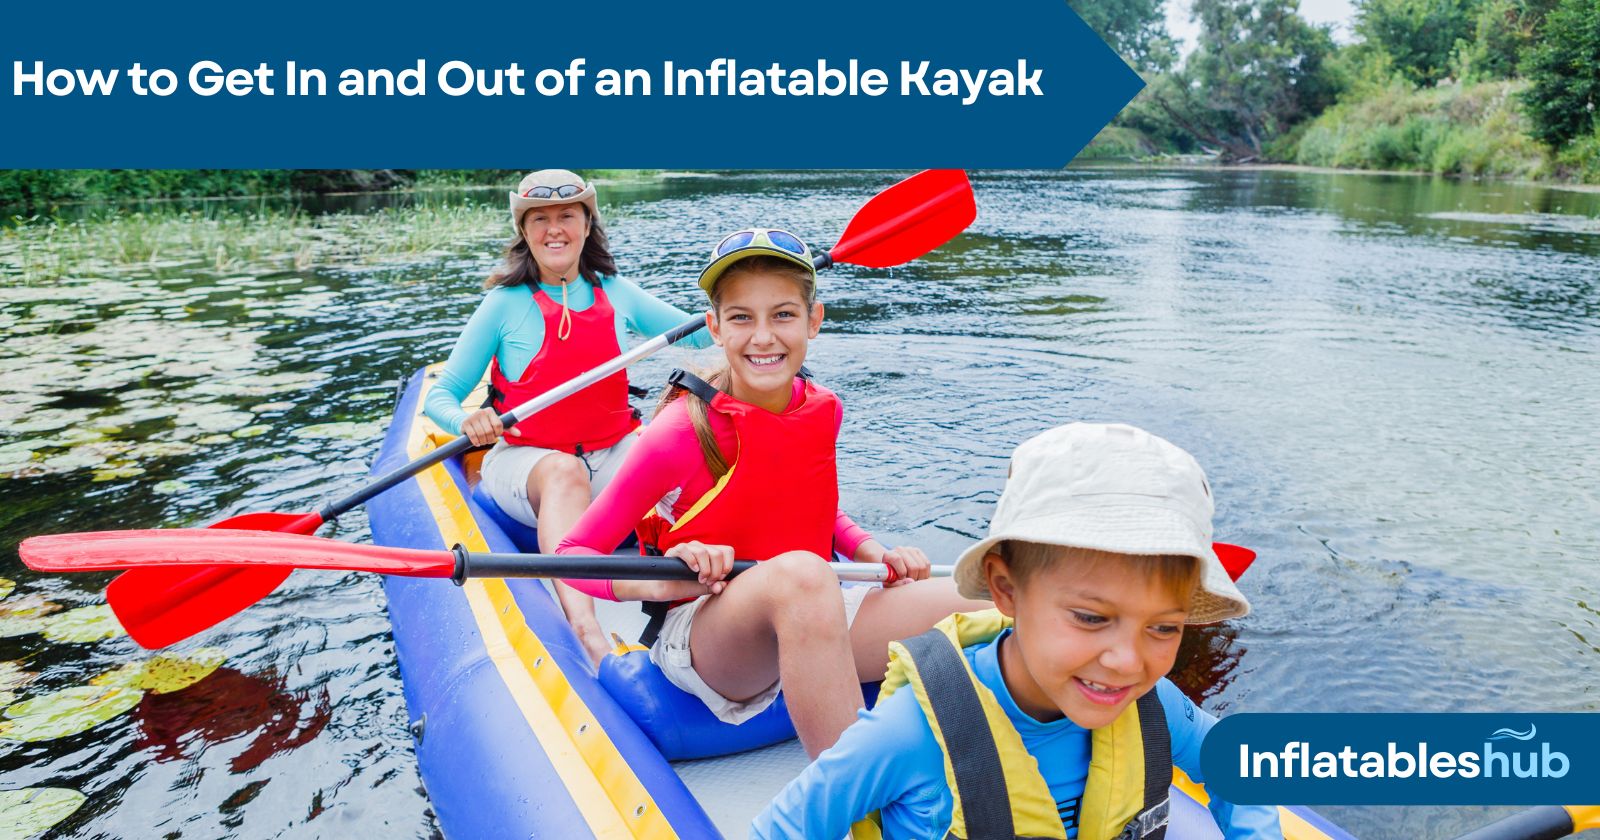 How to Get In and Out of an Inflatable Kayak